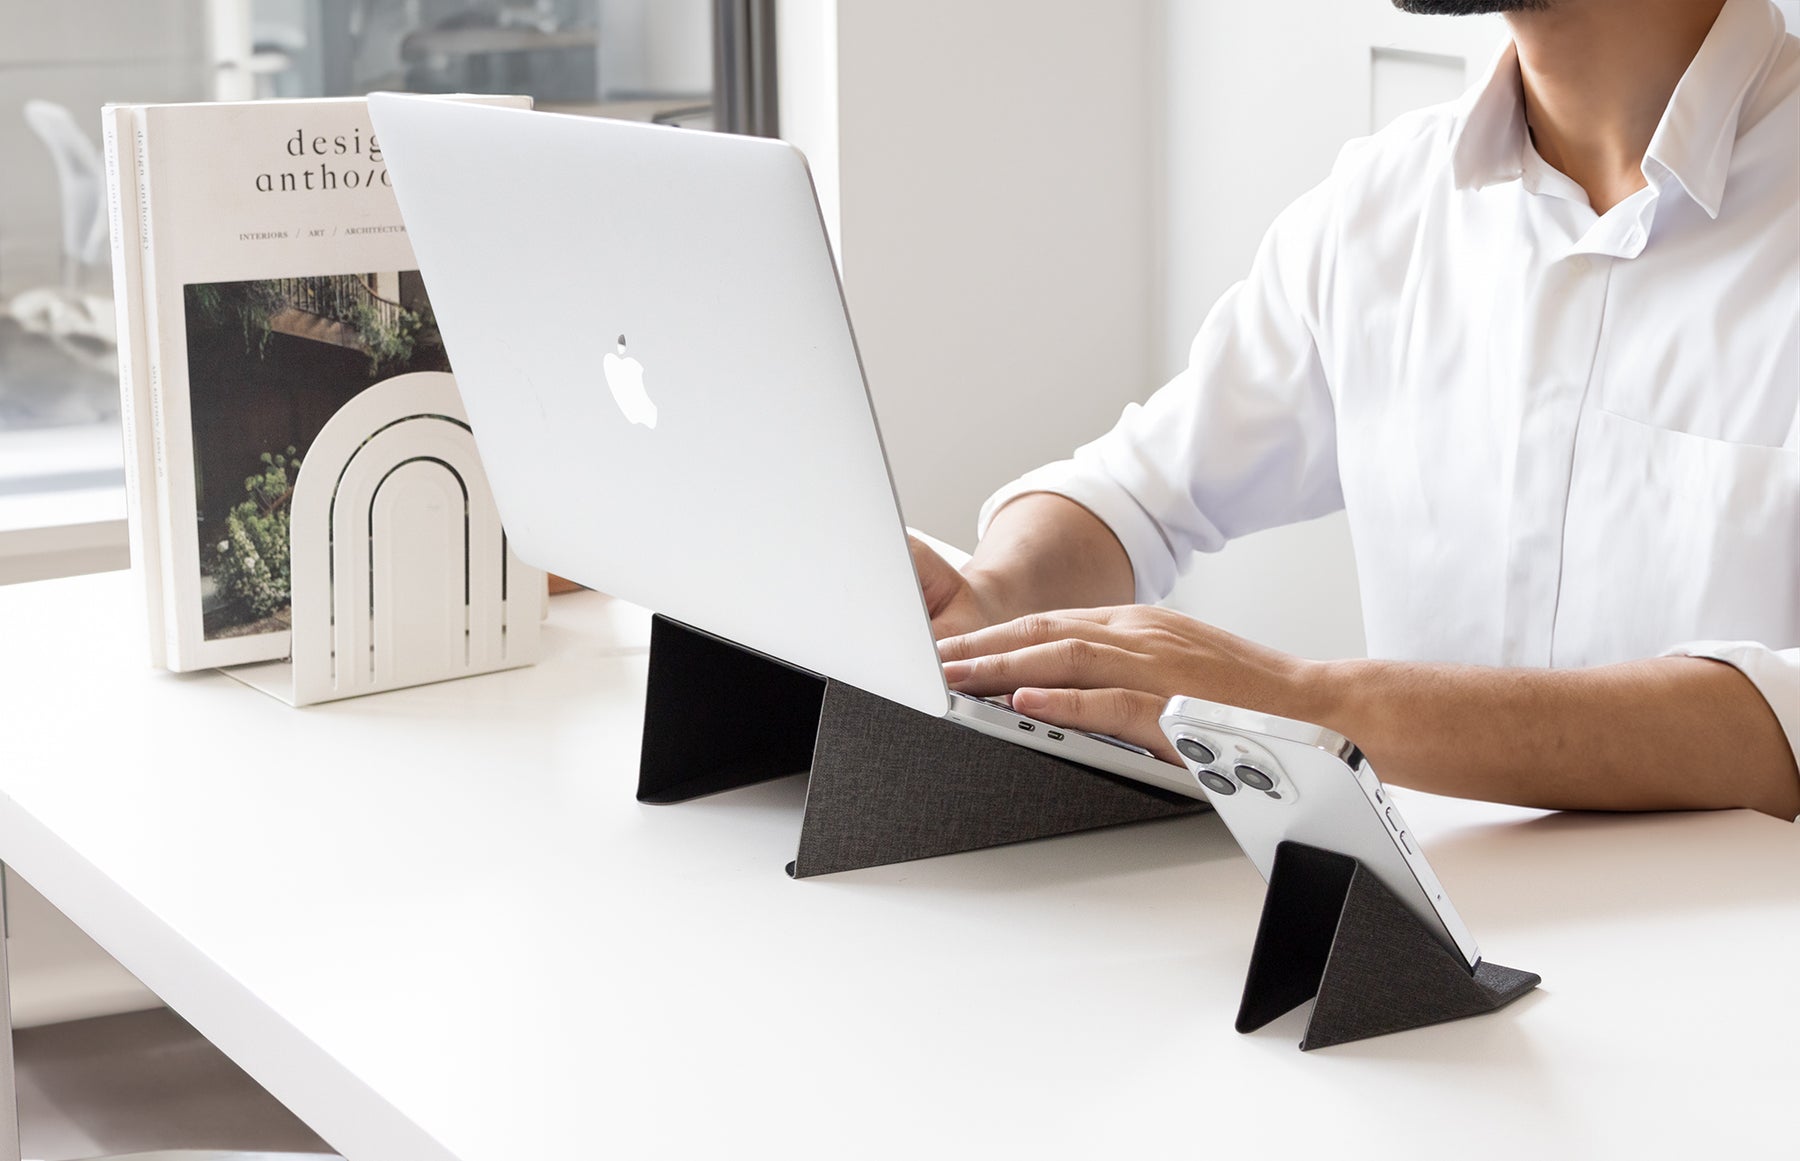 With or Without a Laptop Stand?